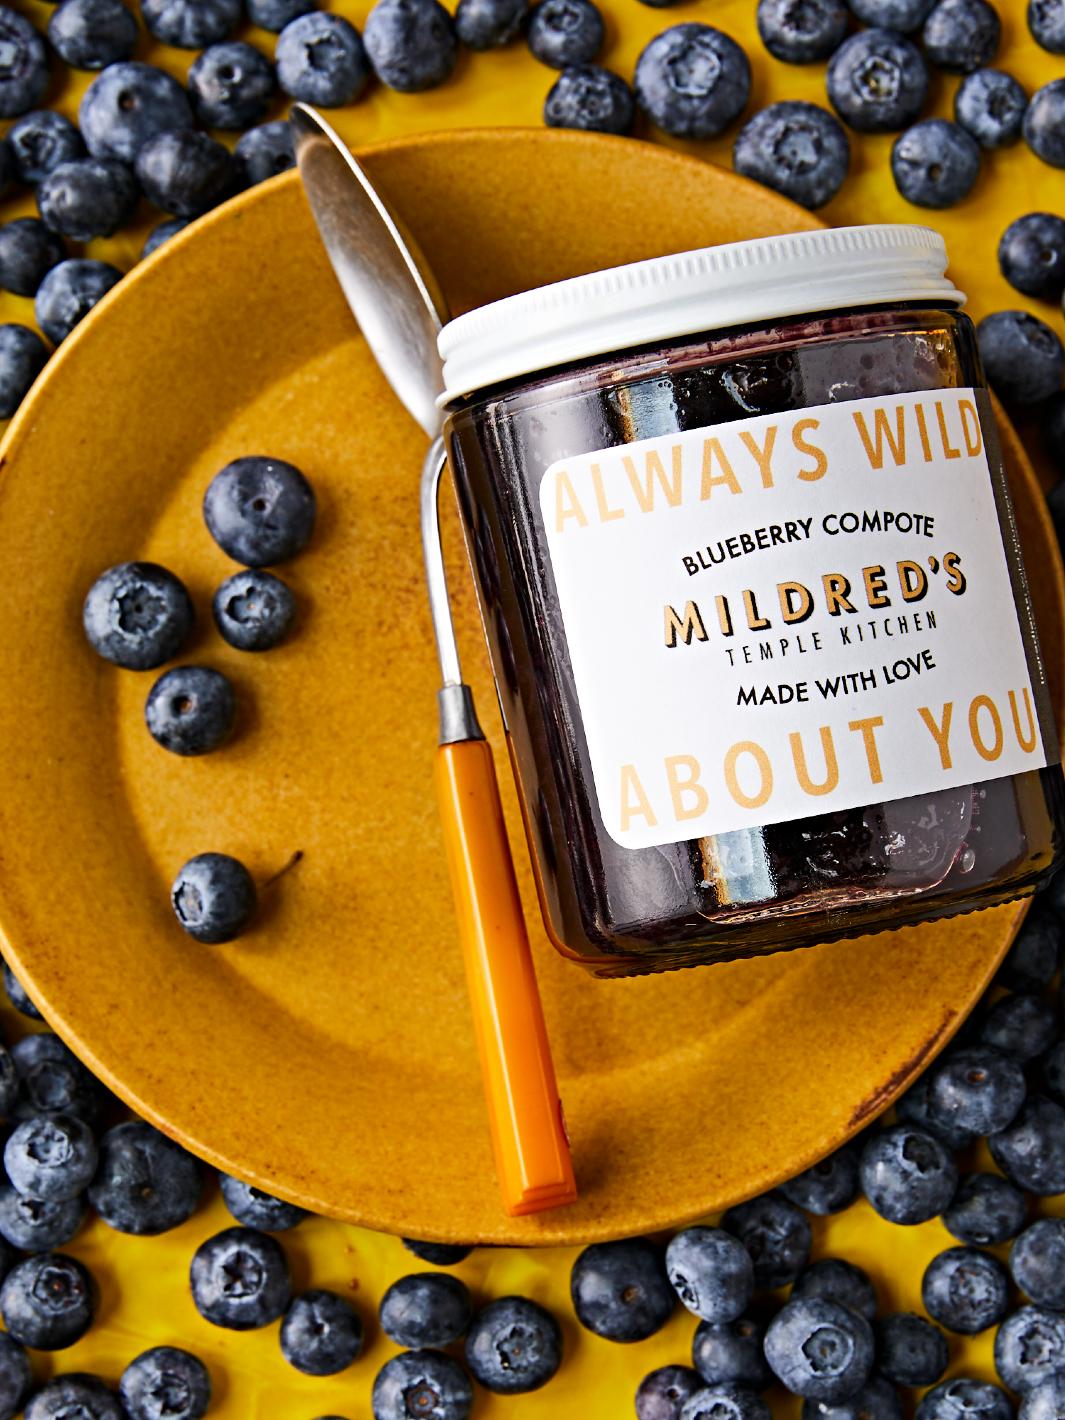 Mildred's Temple Kitchen Wild Blueberry Compote in jar